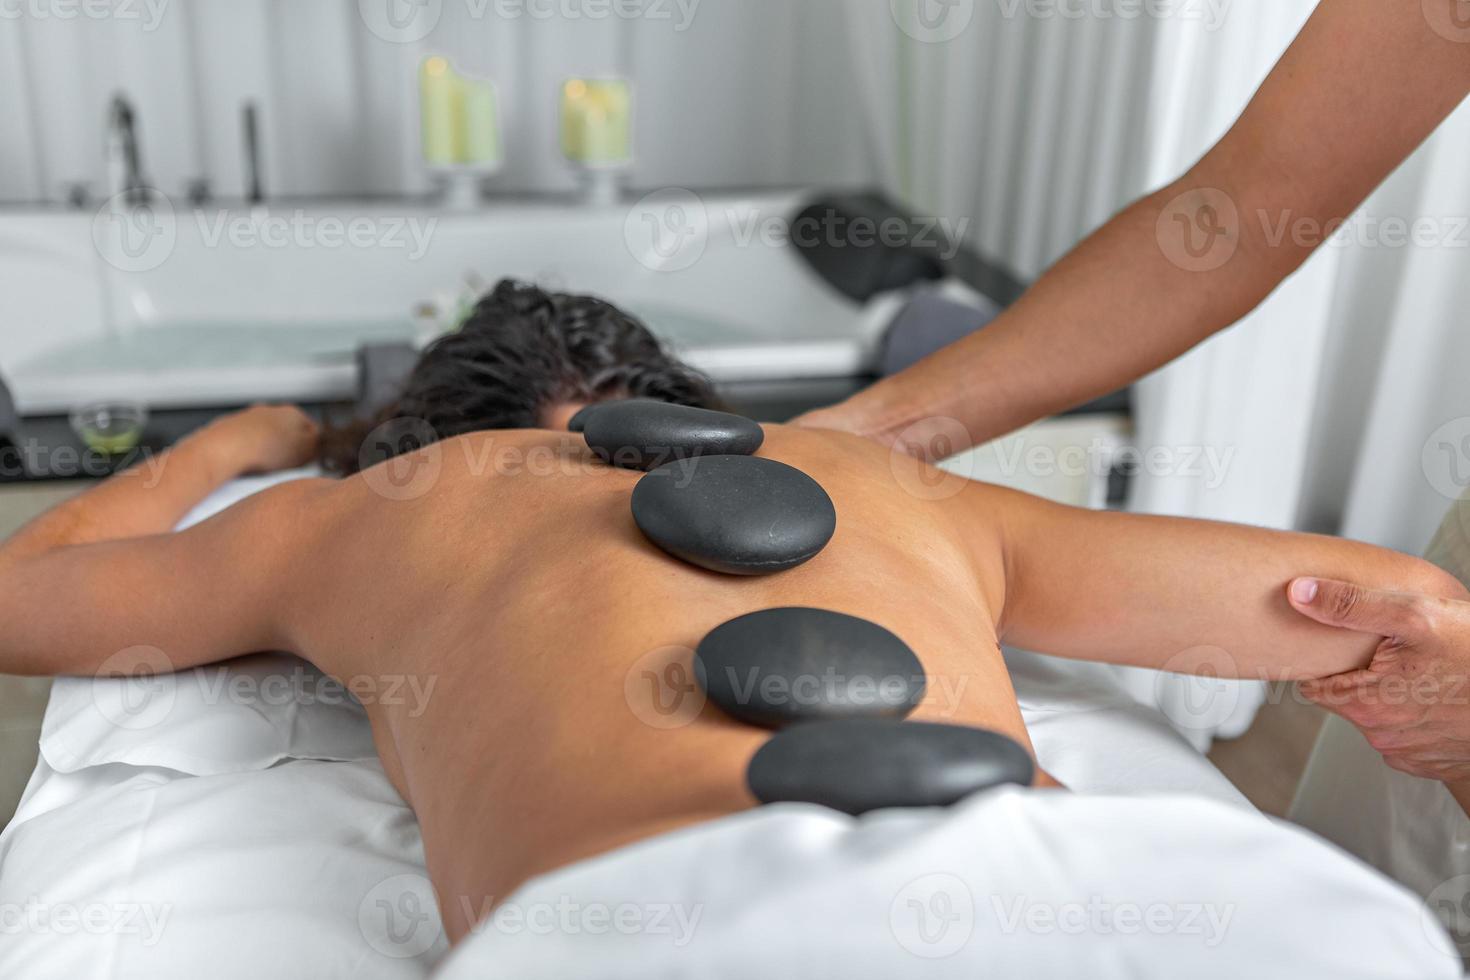 https://static.vecteezy.com/system/resources/previews/019/987/052/non_2x/close-rear-view-of-a-woman-having-hot-stone-massage-in-spa-salon-while-getting-an-arm-and-shoulder-massage-photo.jpg